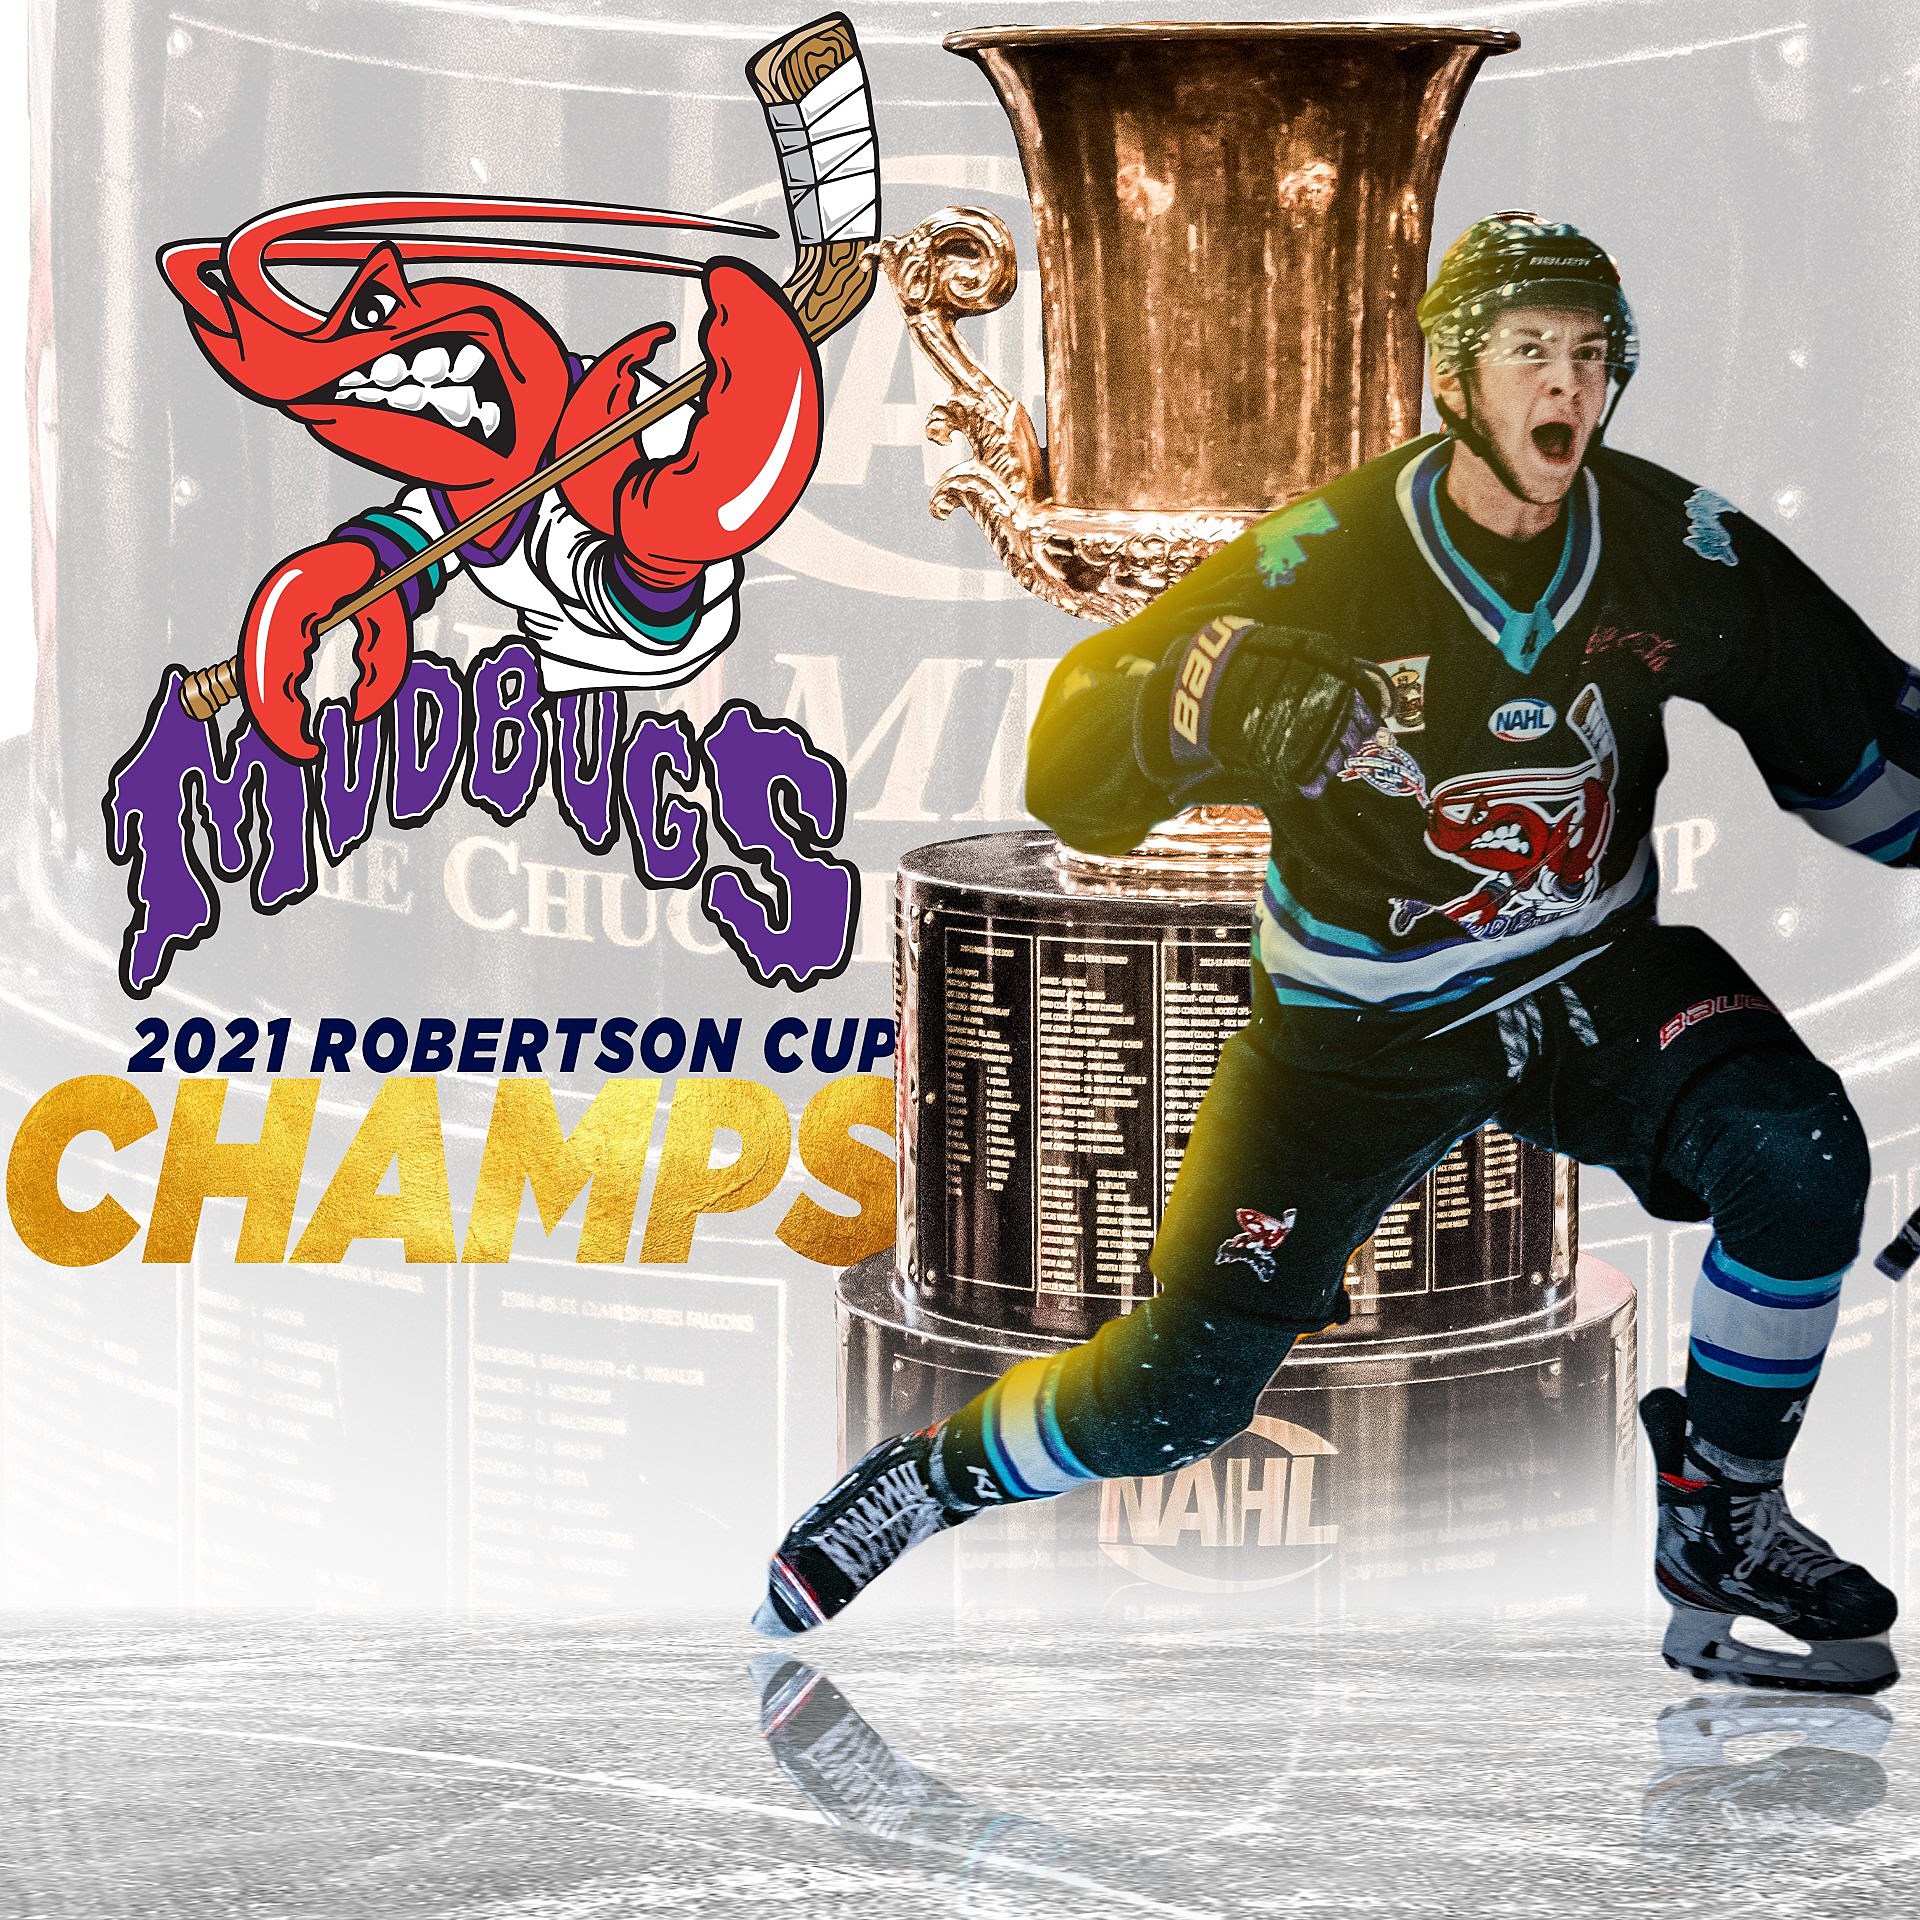 Mudbugs Are Champs!!!